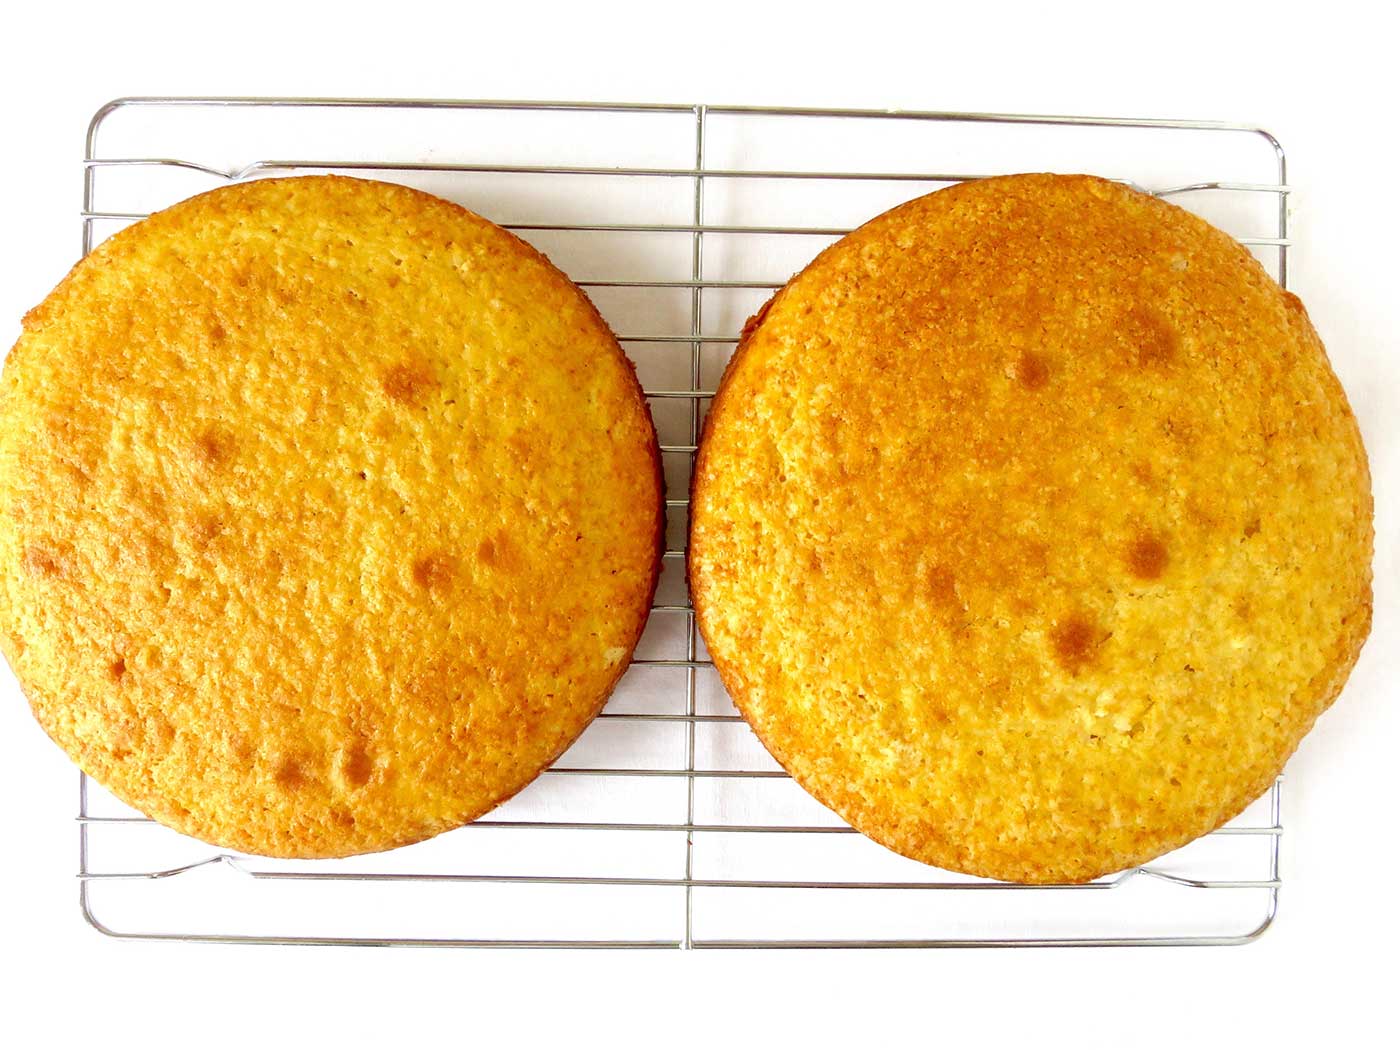 How to Scale a Recipe for Cake to Fit Any Pan